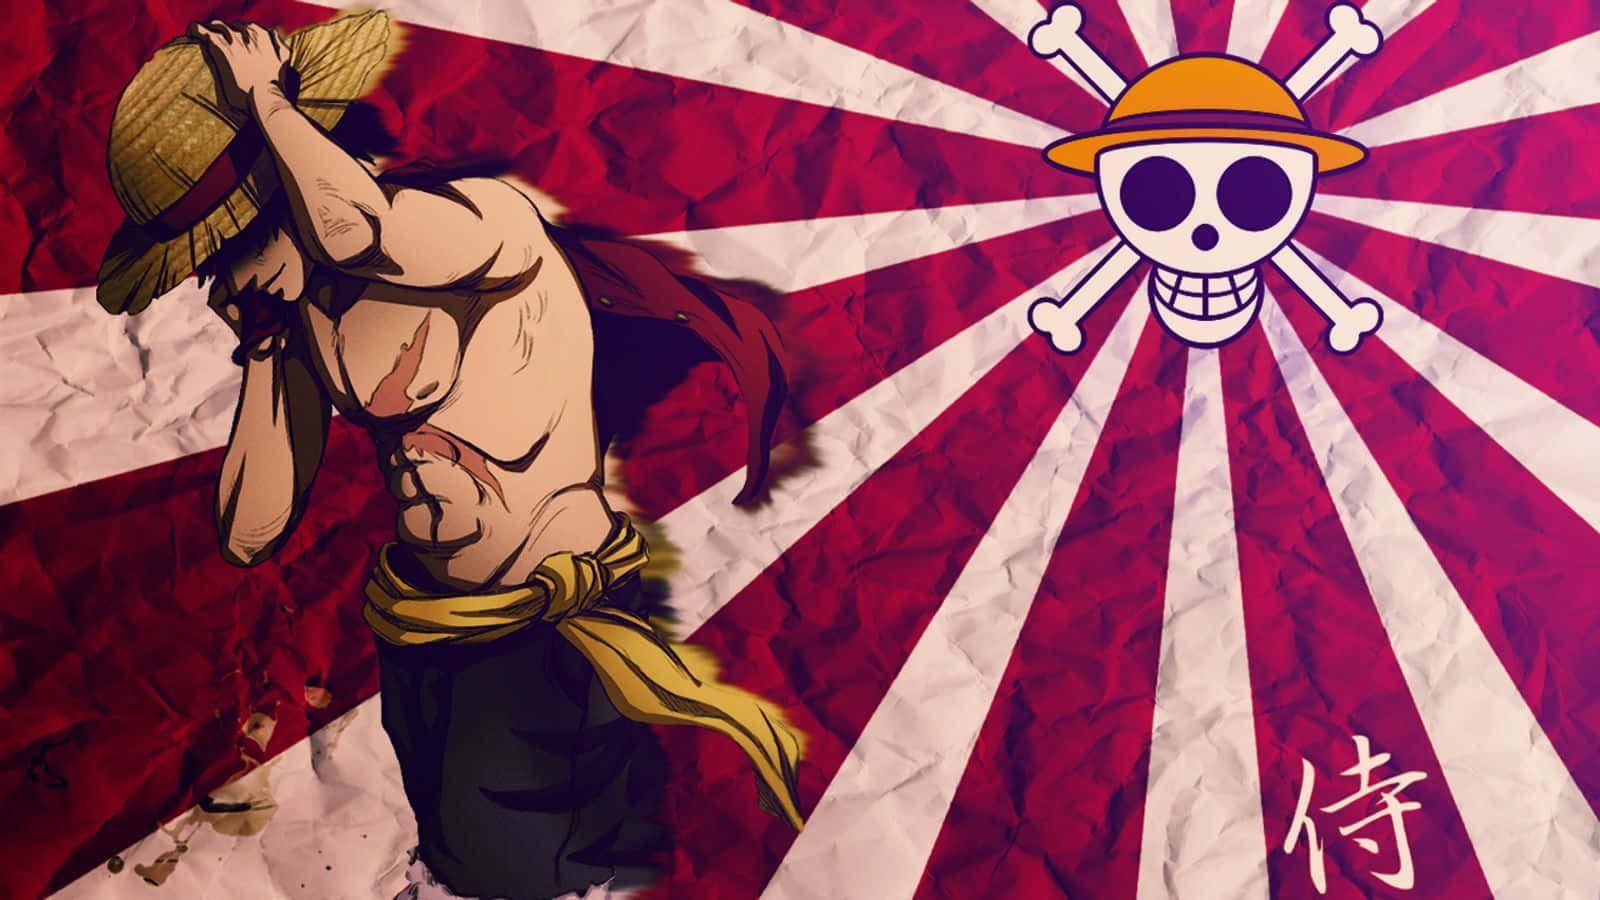 Epic Luffy going beyond his limits to conquer grand adventures Wallpaper